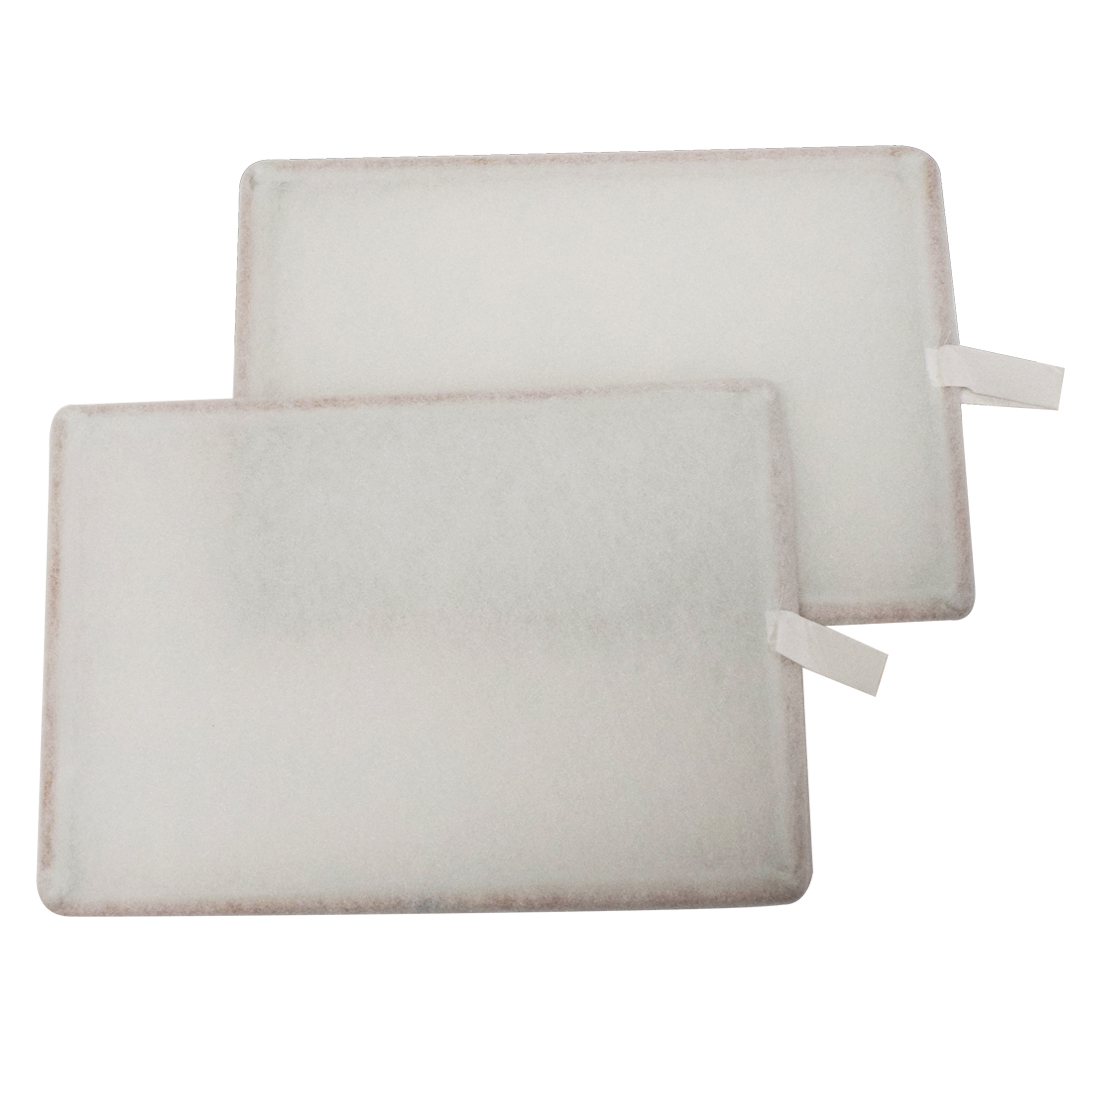 Genuine Vent Axia Kinetic G3 Filter BH, E, V (pack of 2)